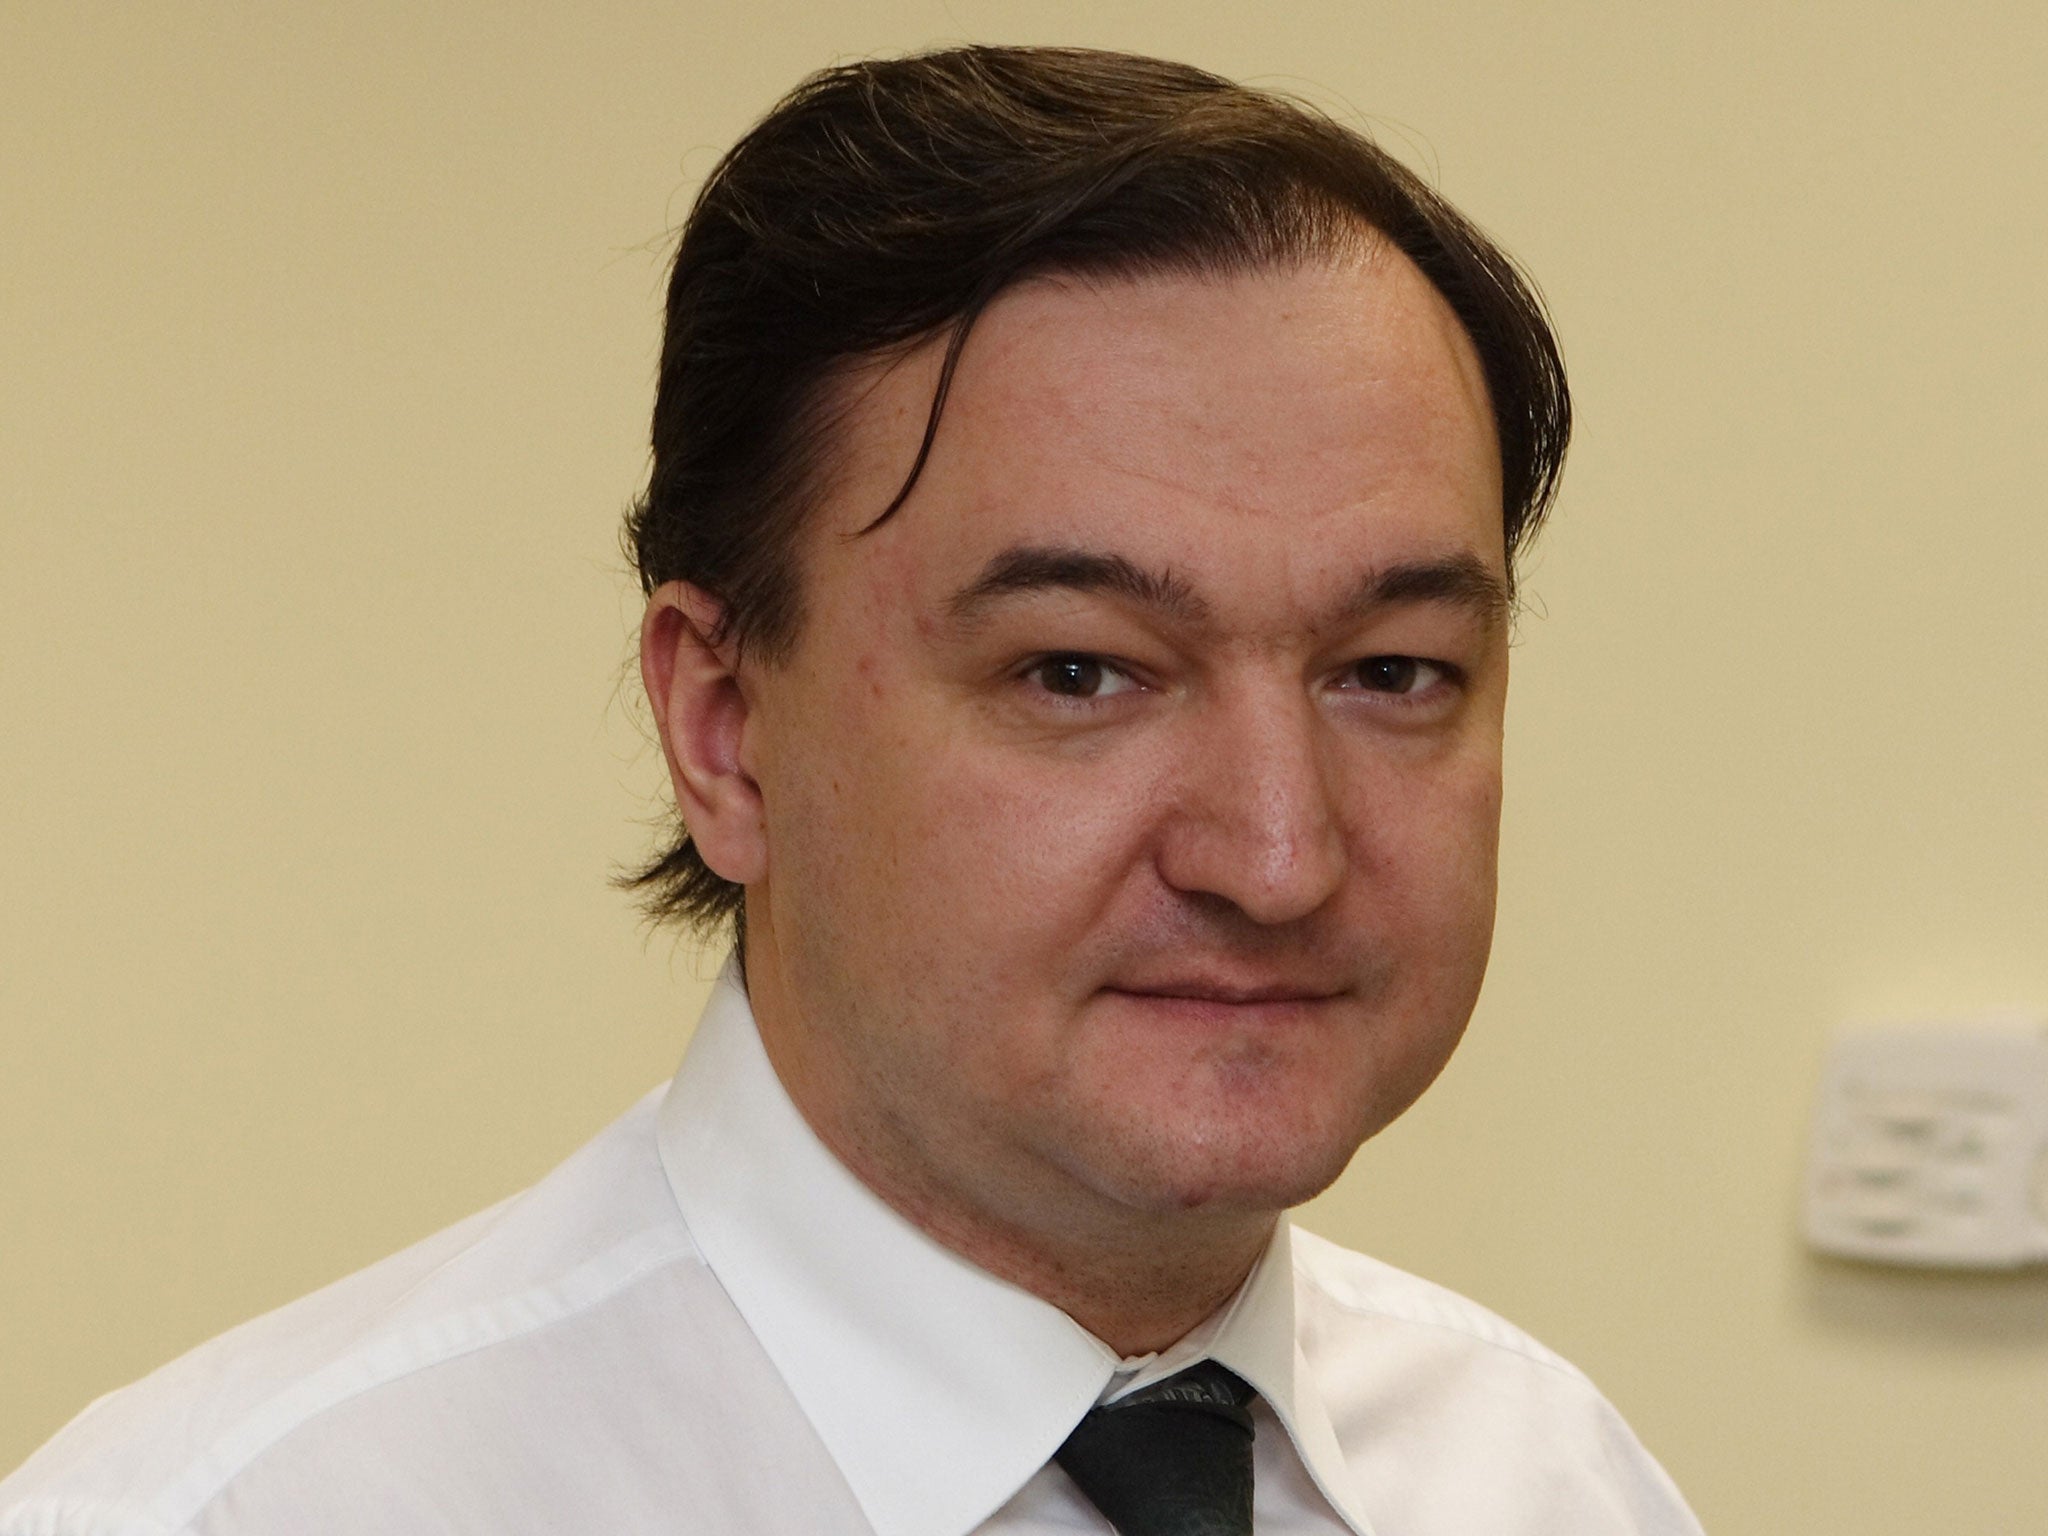 Russian lawyer Sergei Magnitsky, who uncovered the scam, died in police custody 